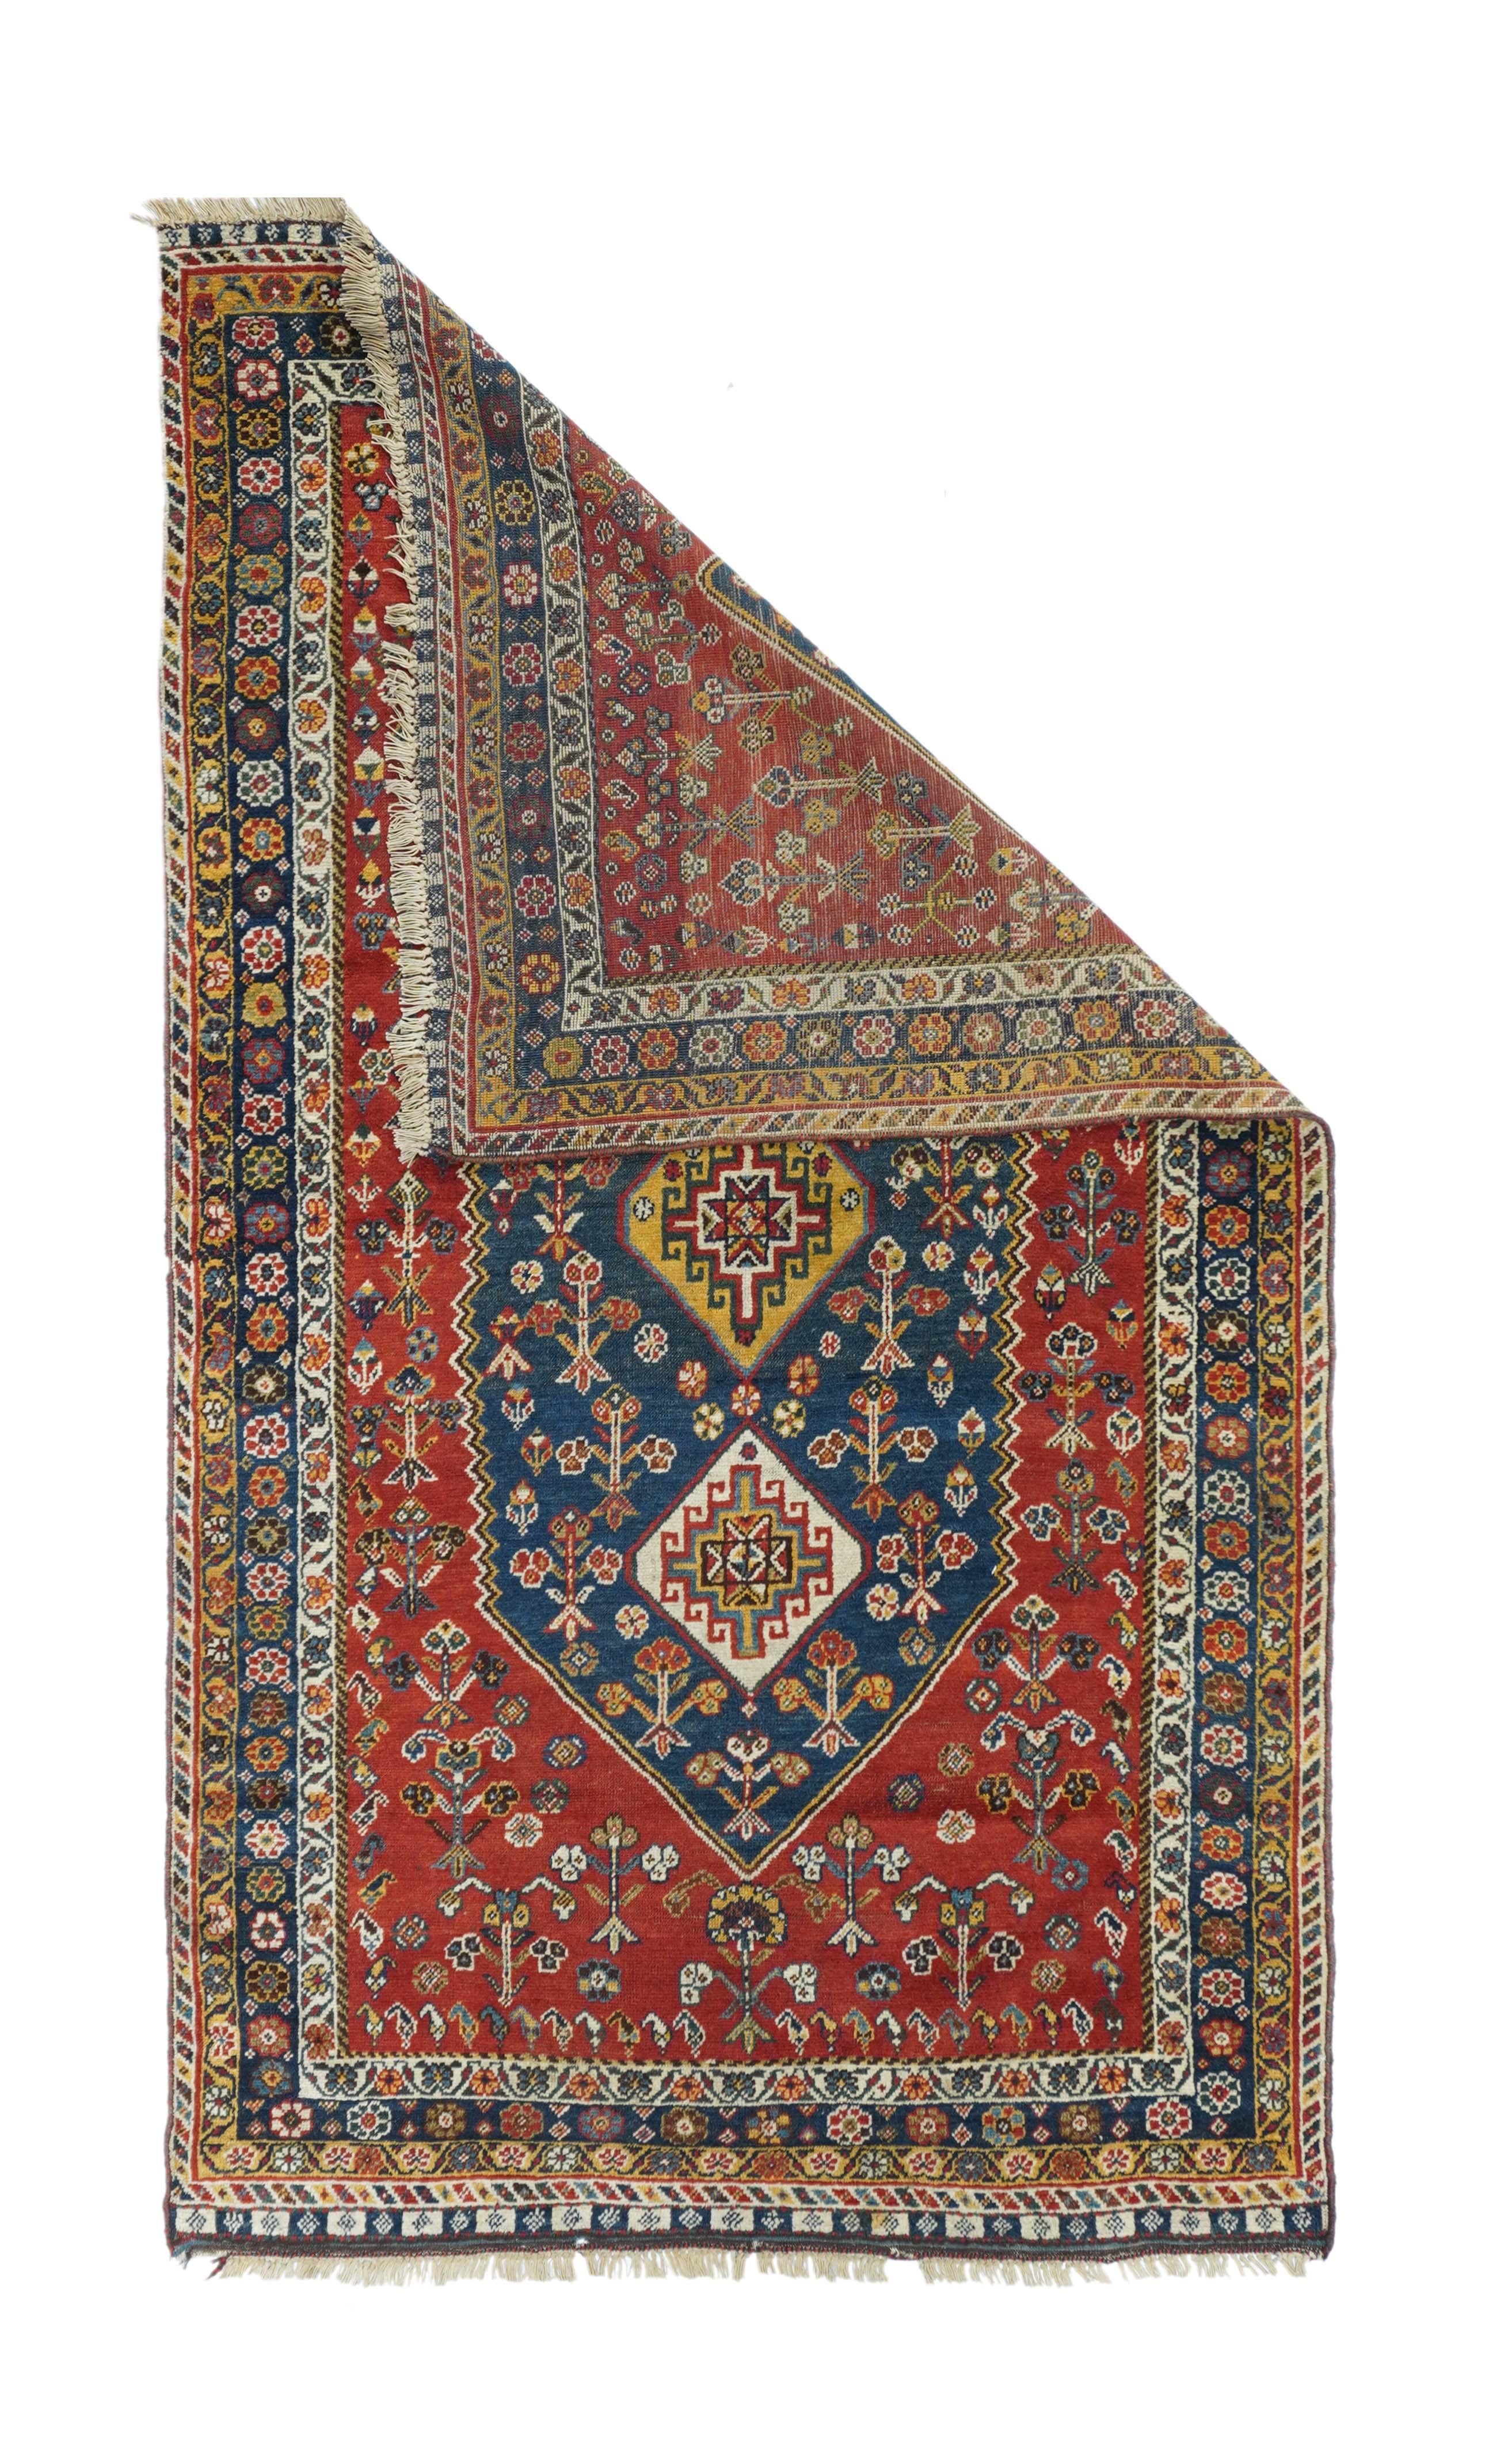 Antique Qashqai rug, measures : 3'10'' x 7'1''. The red, subfield, with unidirectional flowers, hosts a hexagonal navy subfield centred by three stretched hexagonal Memling gul medallions in cream and straw. Royal blue main band with rosettes;